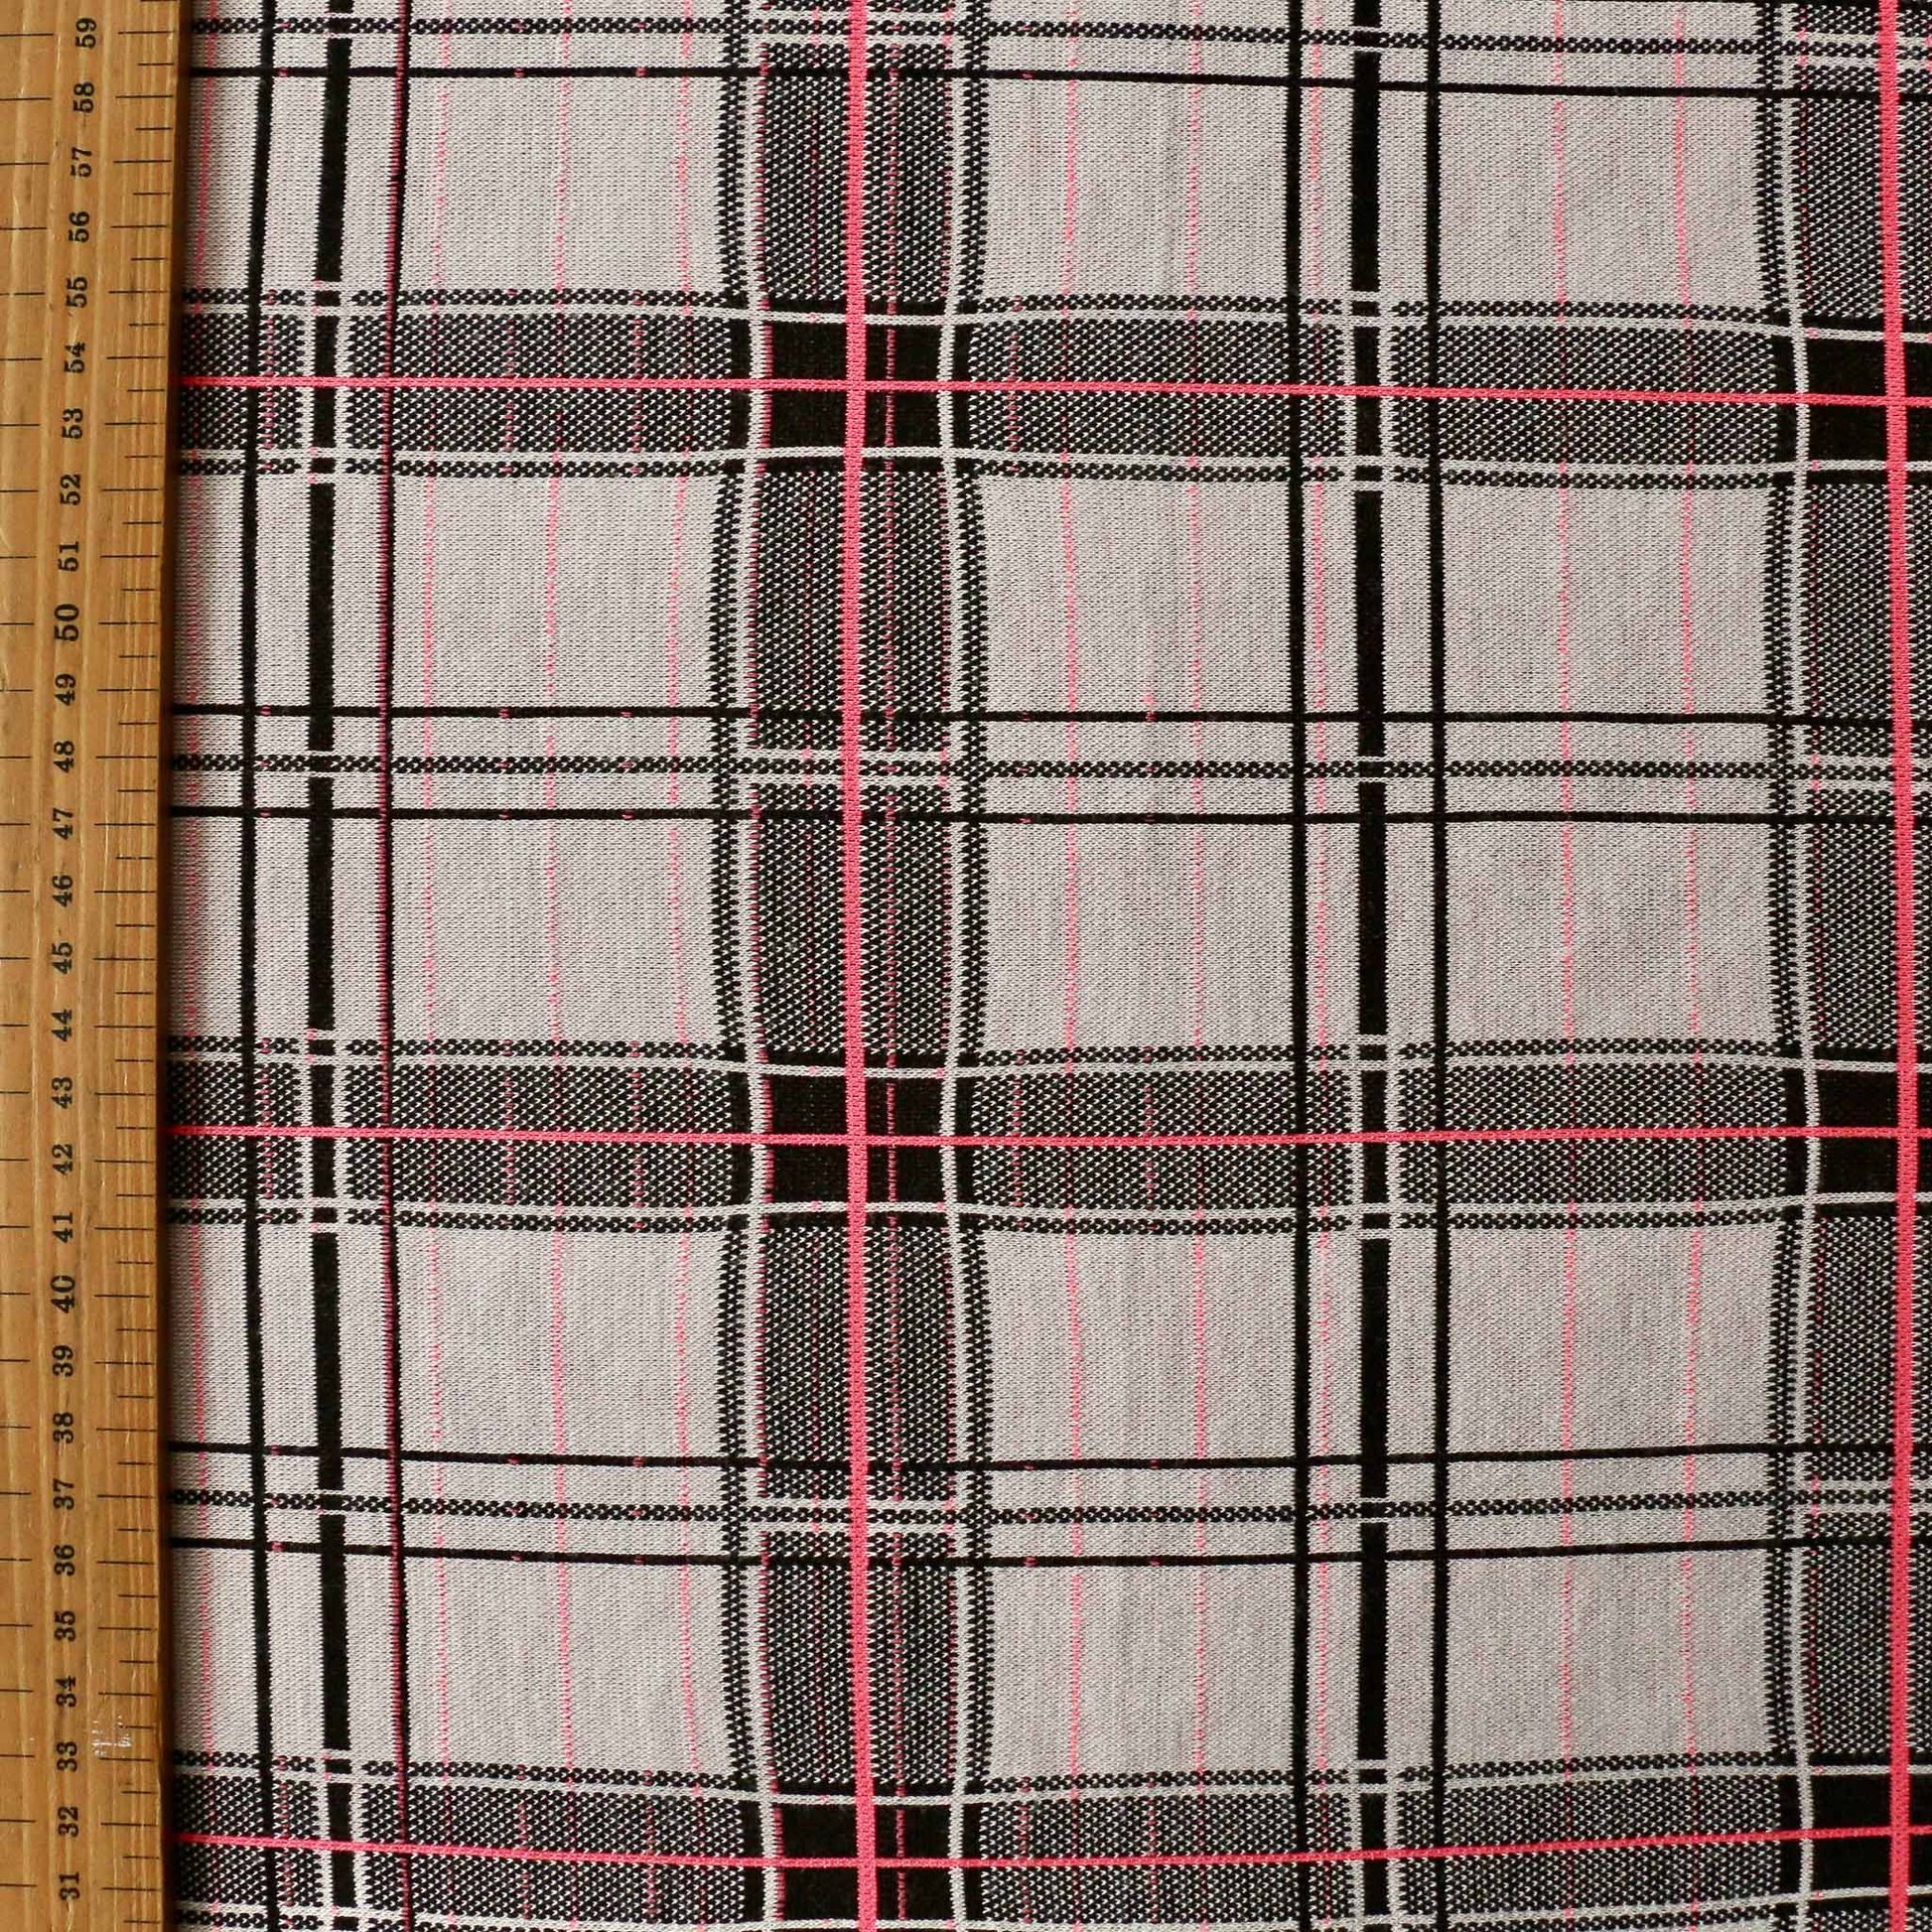 metre check design ponte roma jersey knit dressmaking fabric in pink and white